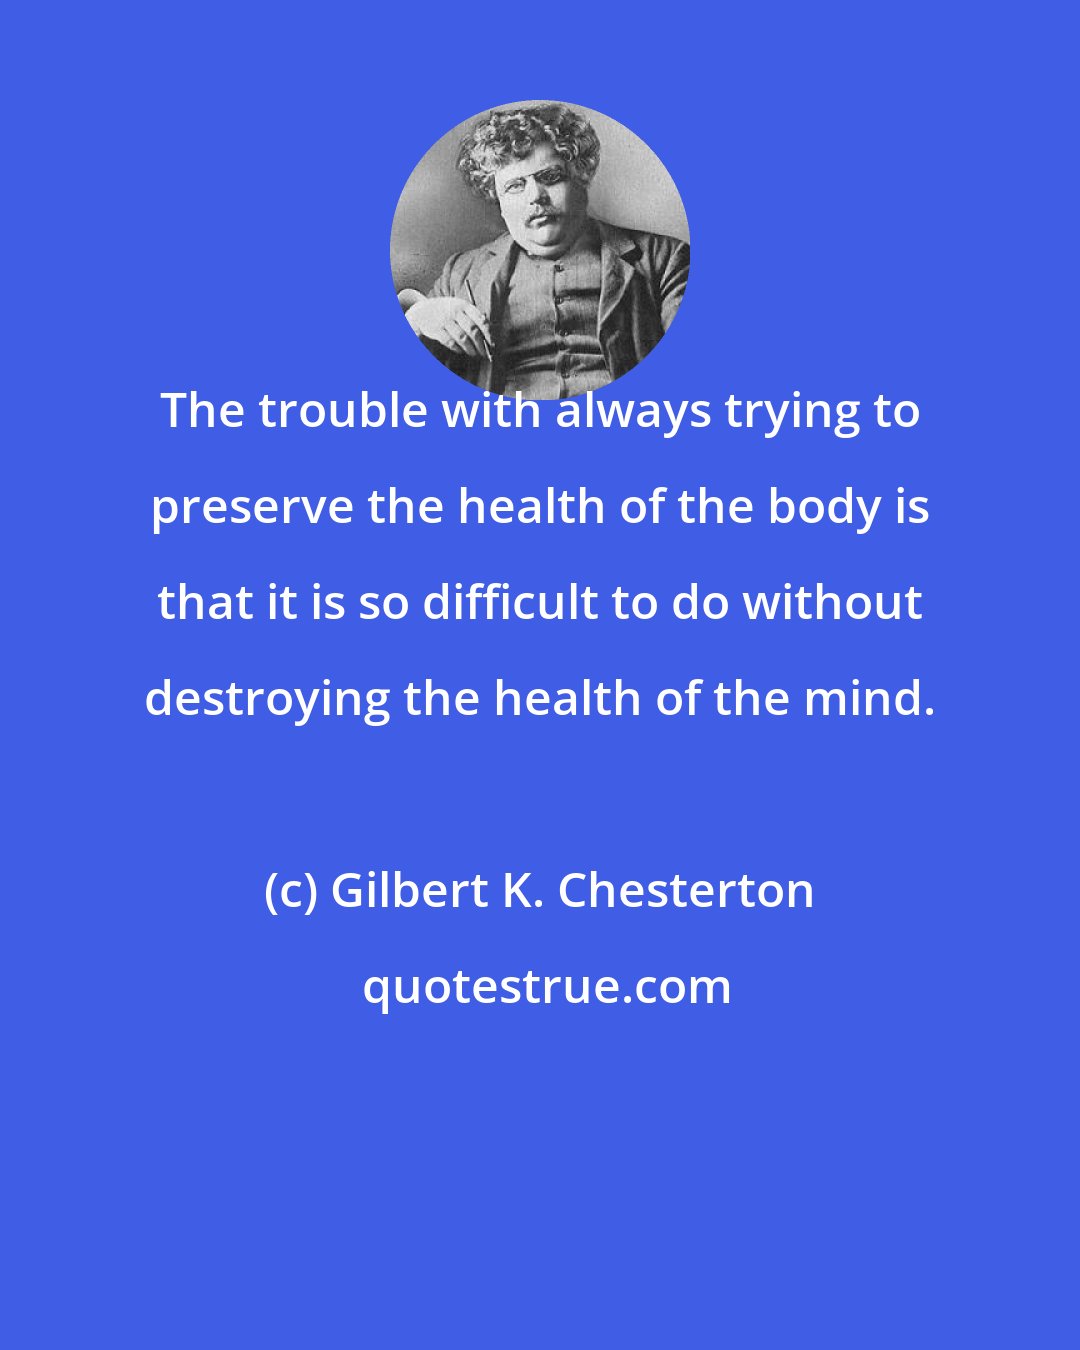 Gilbert K. Chesterton: The trouble with always trying to preserve the health of the body is that it is so difficult to do without destroying the health of the mind.